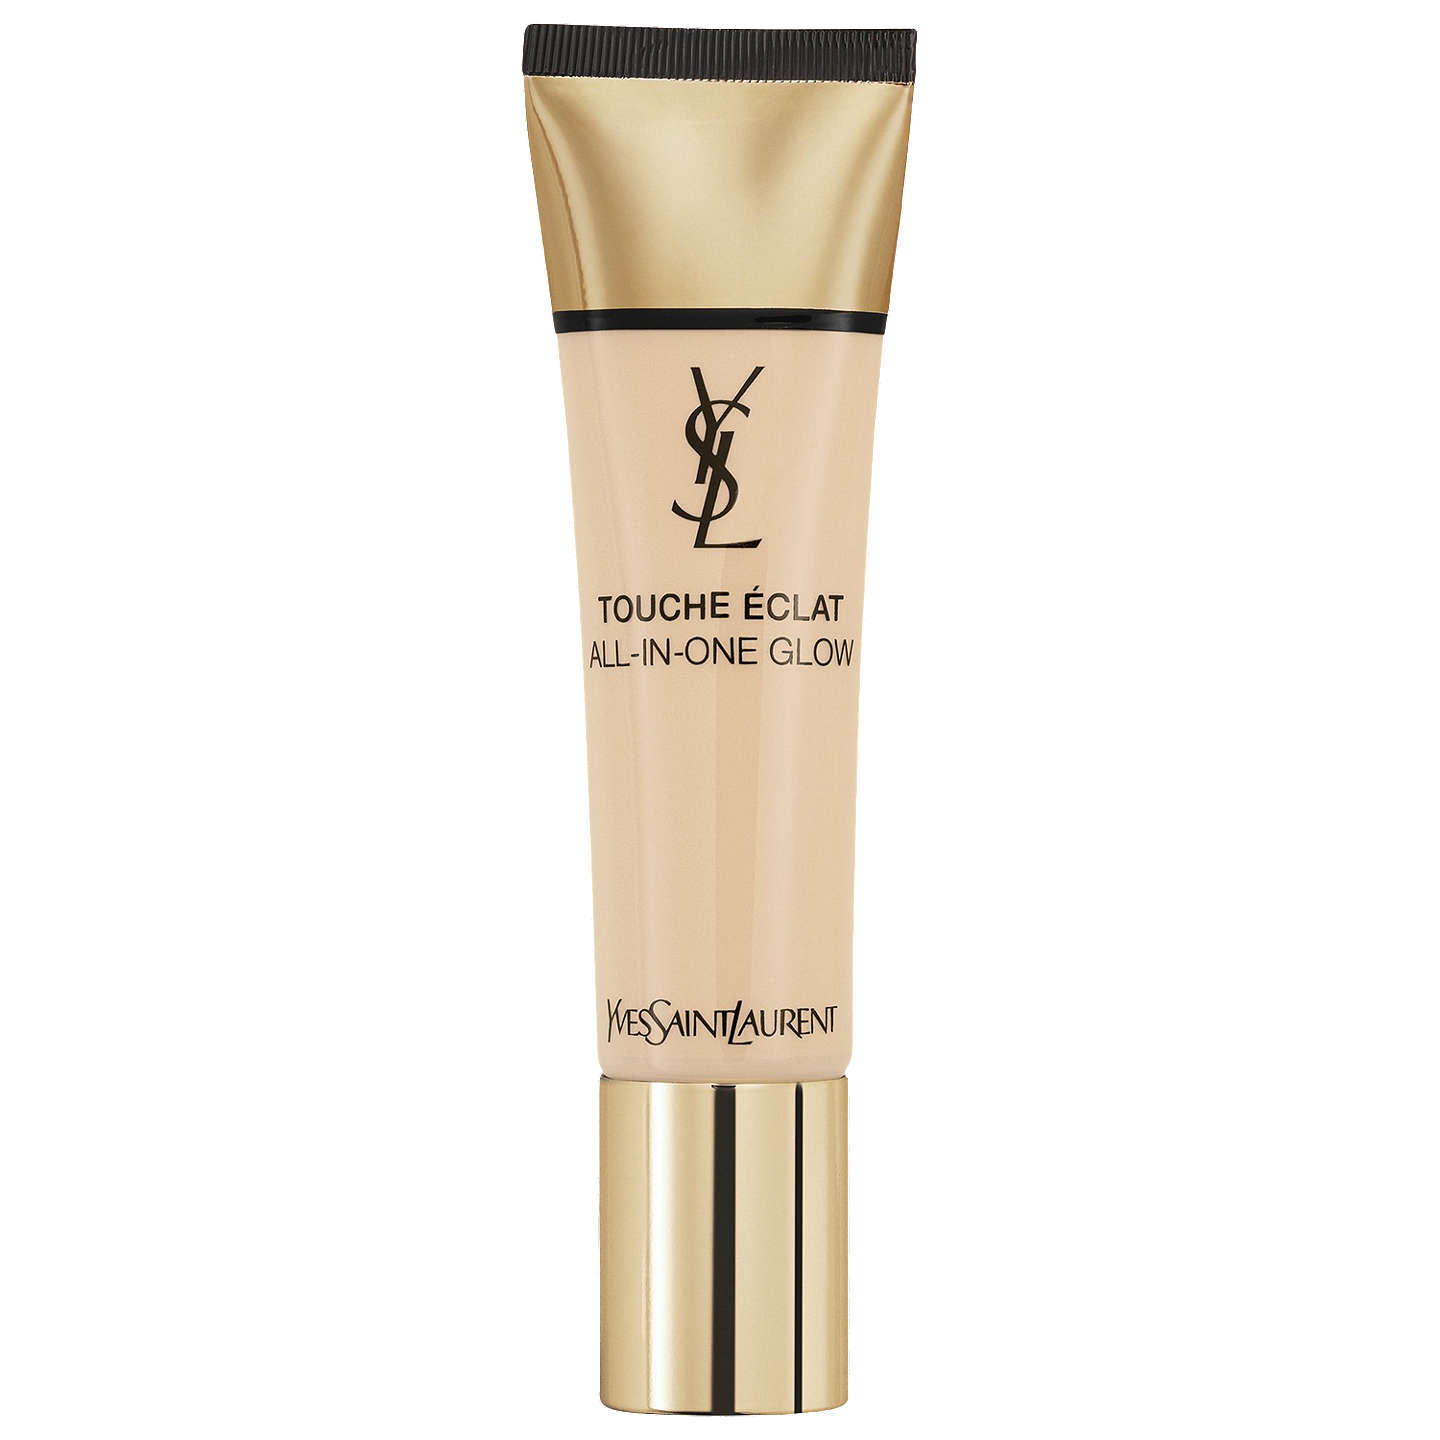 Touche Eclat All-in-One Glow Foundation